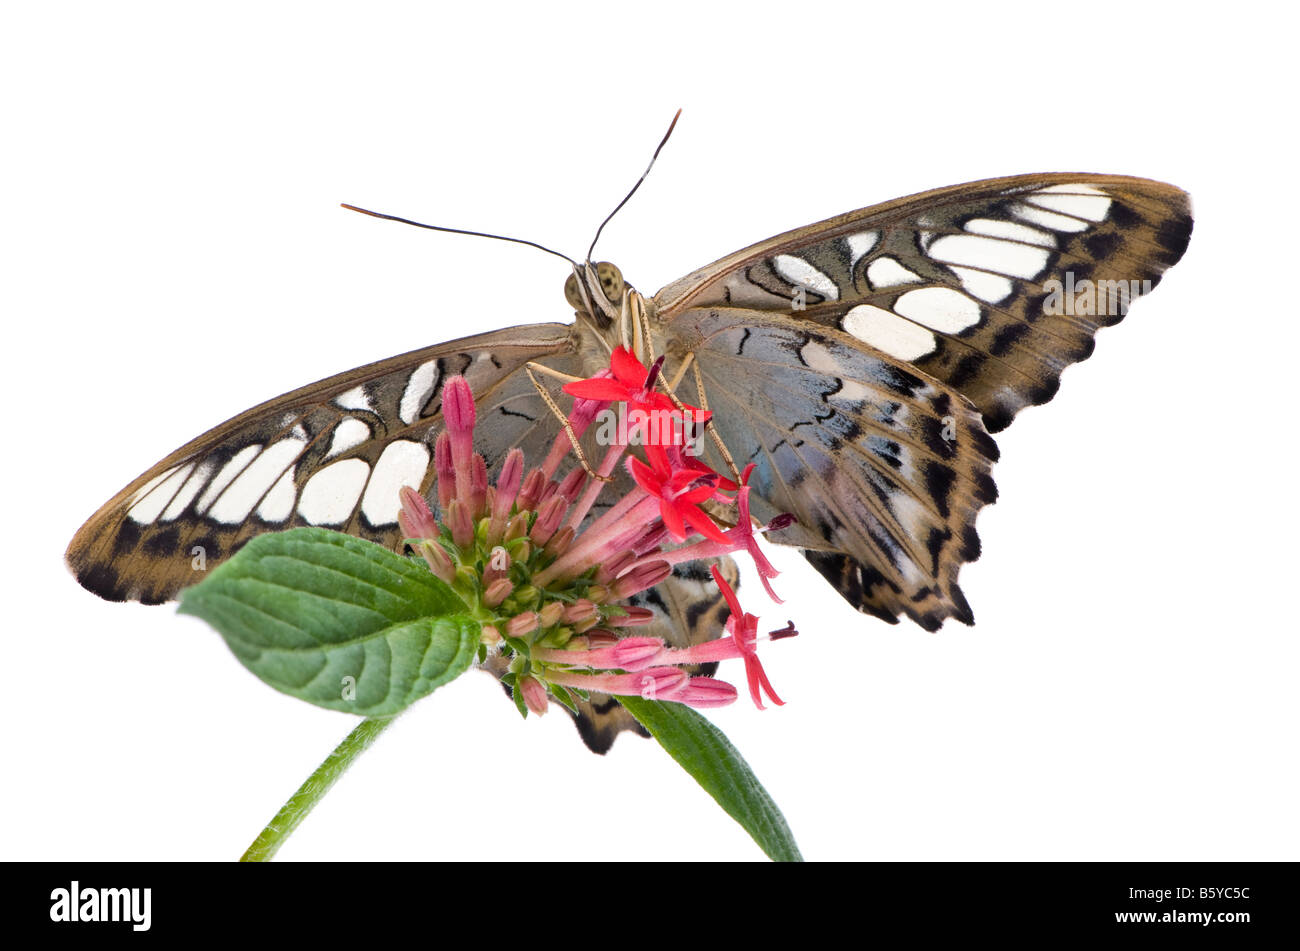 Morpho peleides butterfly in front of a white background Stock Photo